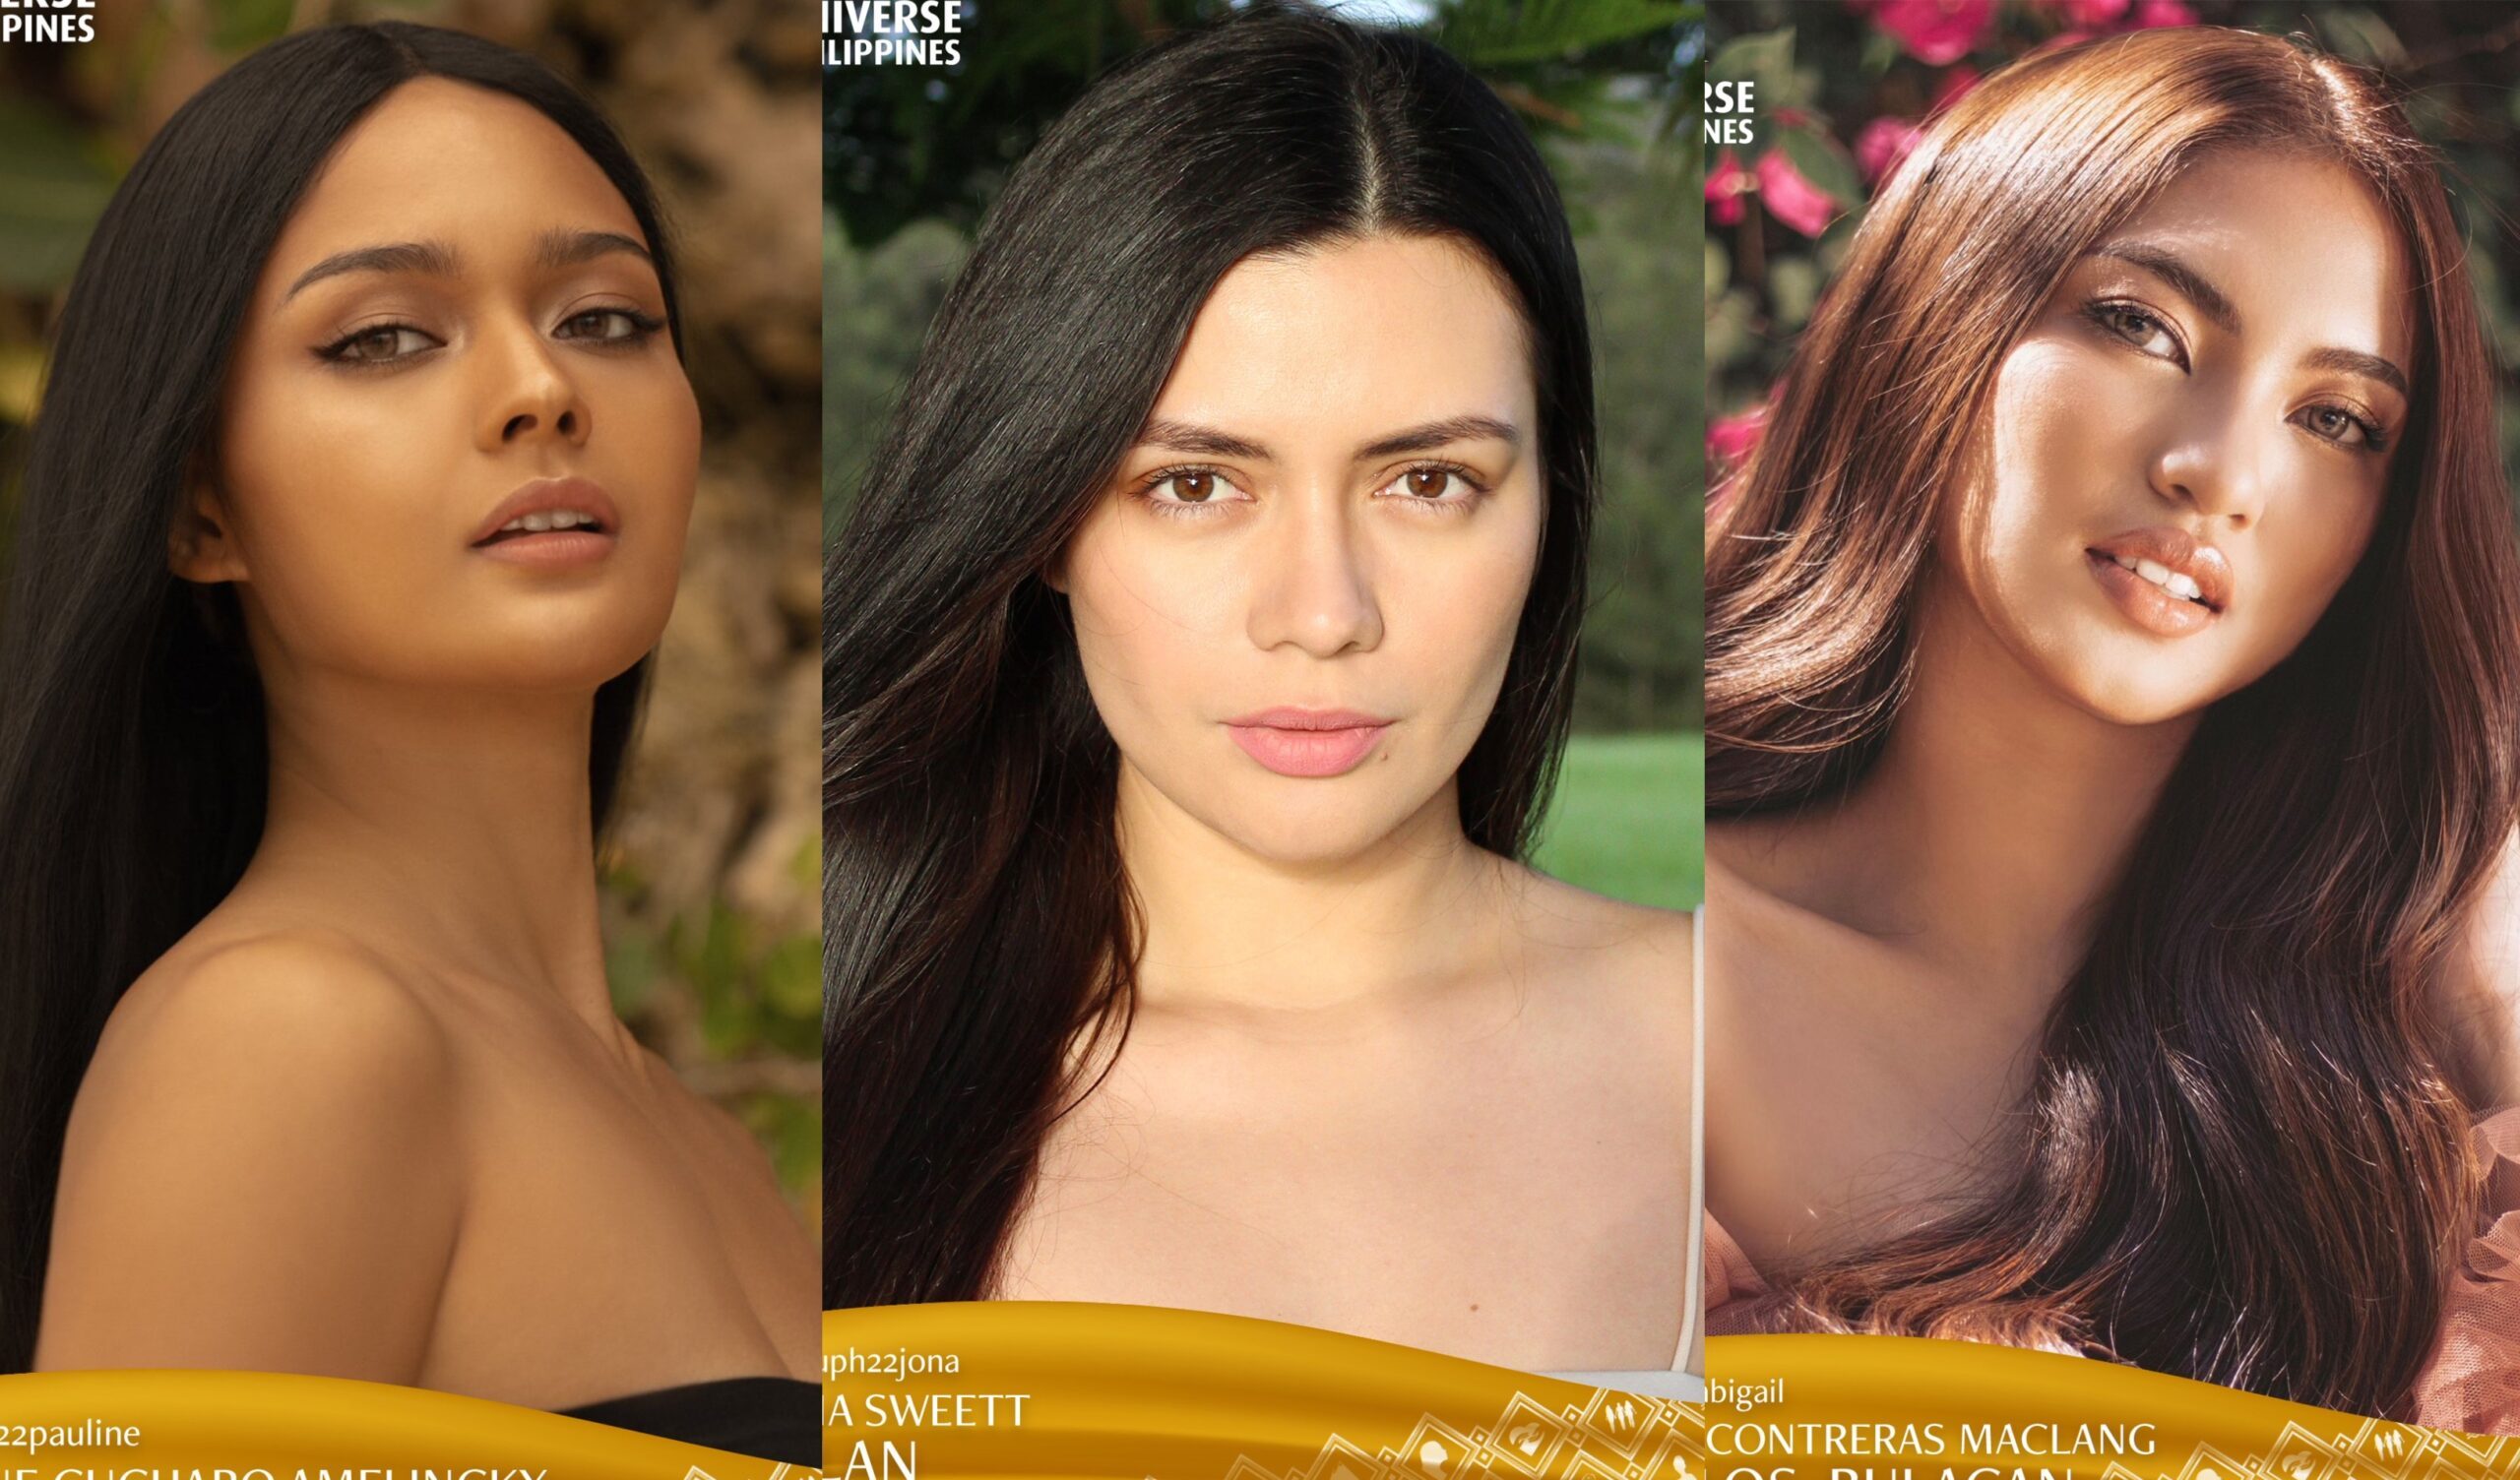 IN PHOTOS: The Miss Universe Philippines 2022 delegates’ headshot challenge